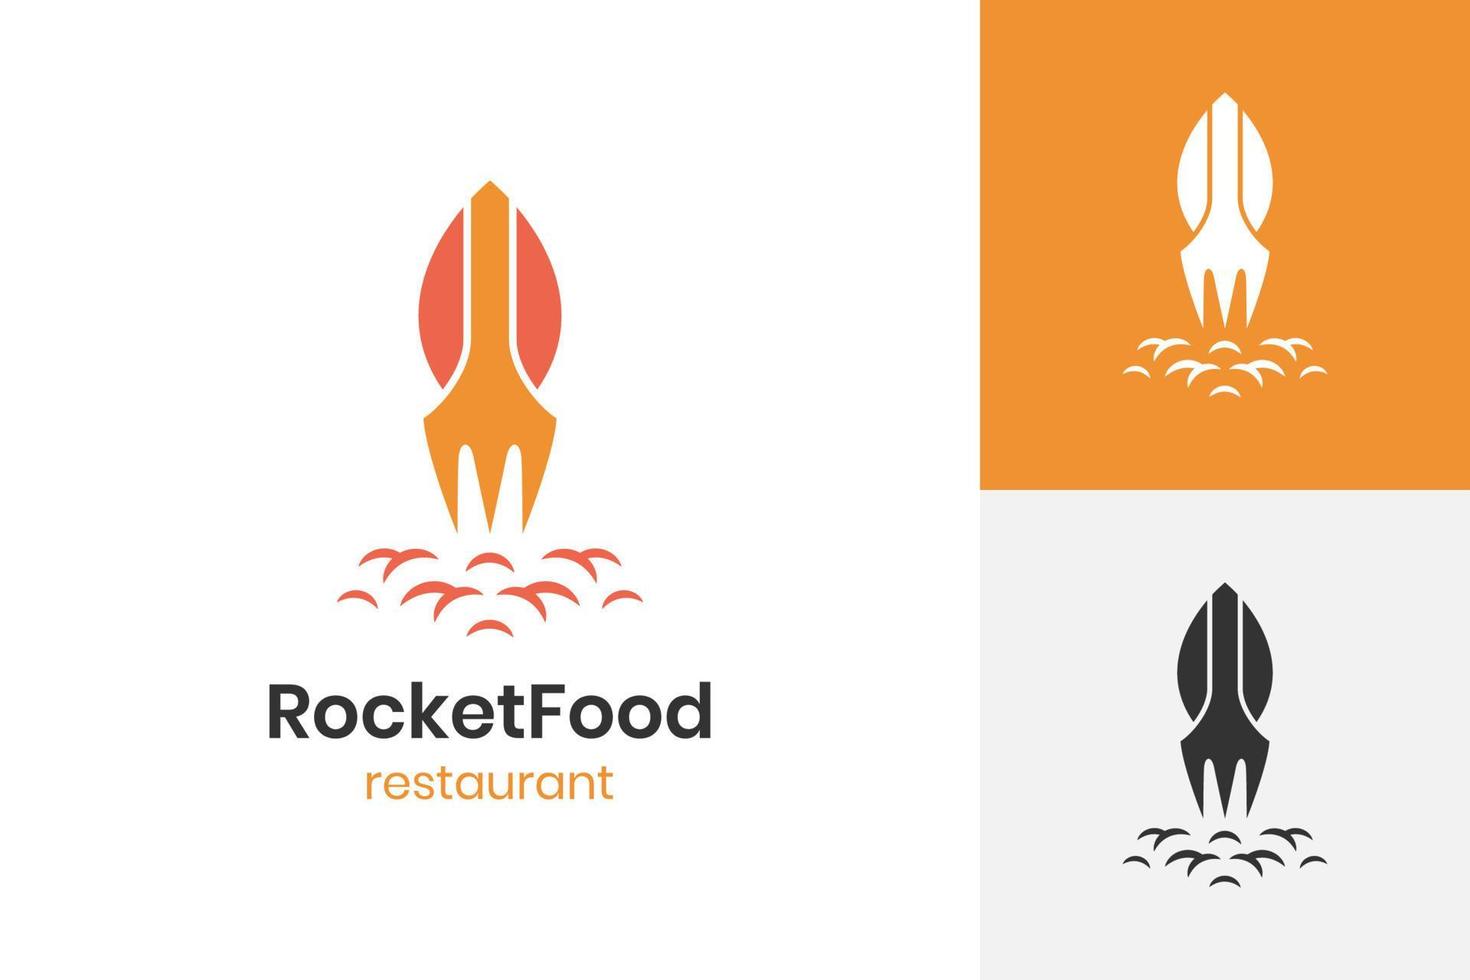 Rocket launch logo concept combination fork. Fast food delivery logo template. restaurant food logo icon vector